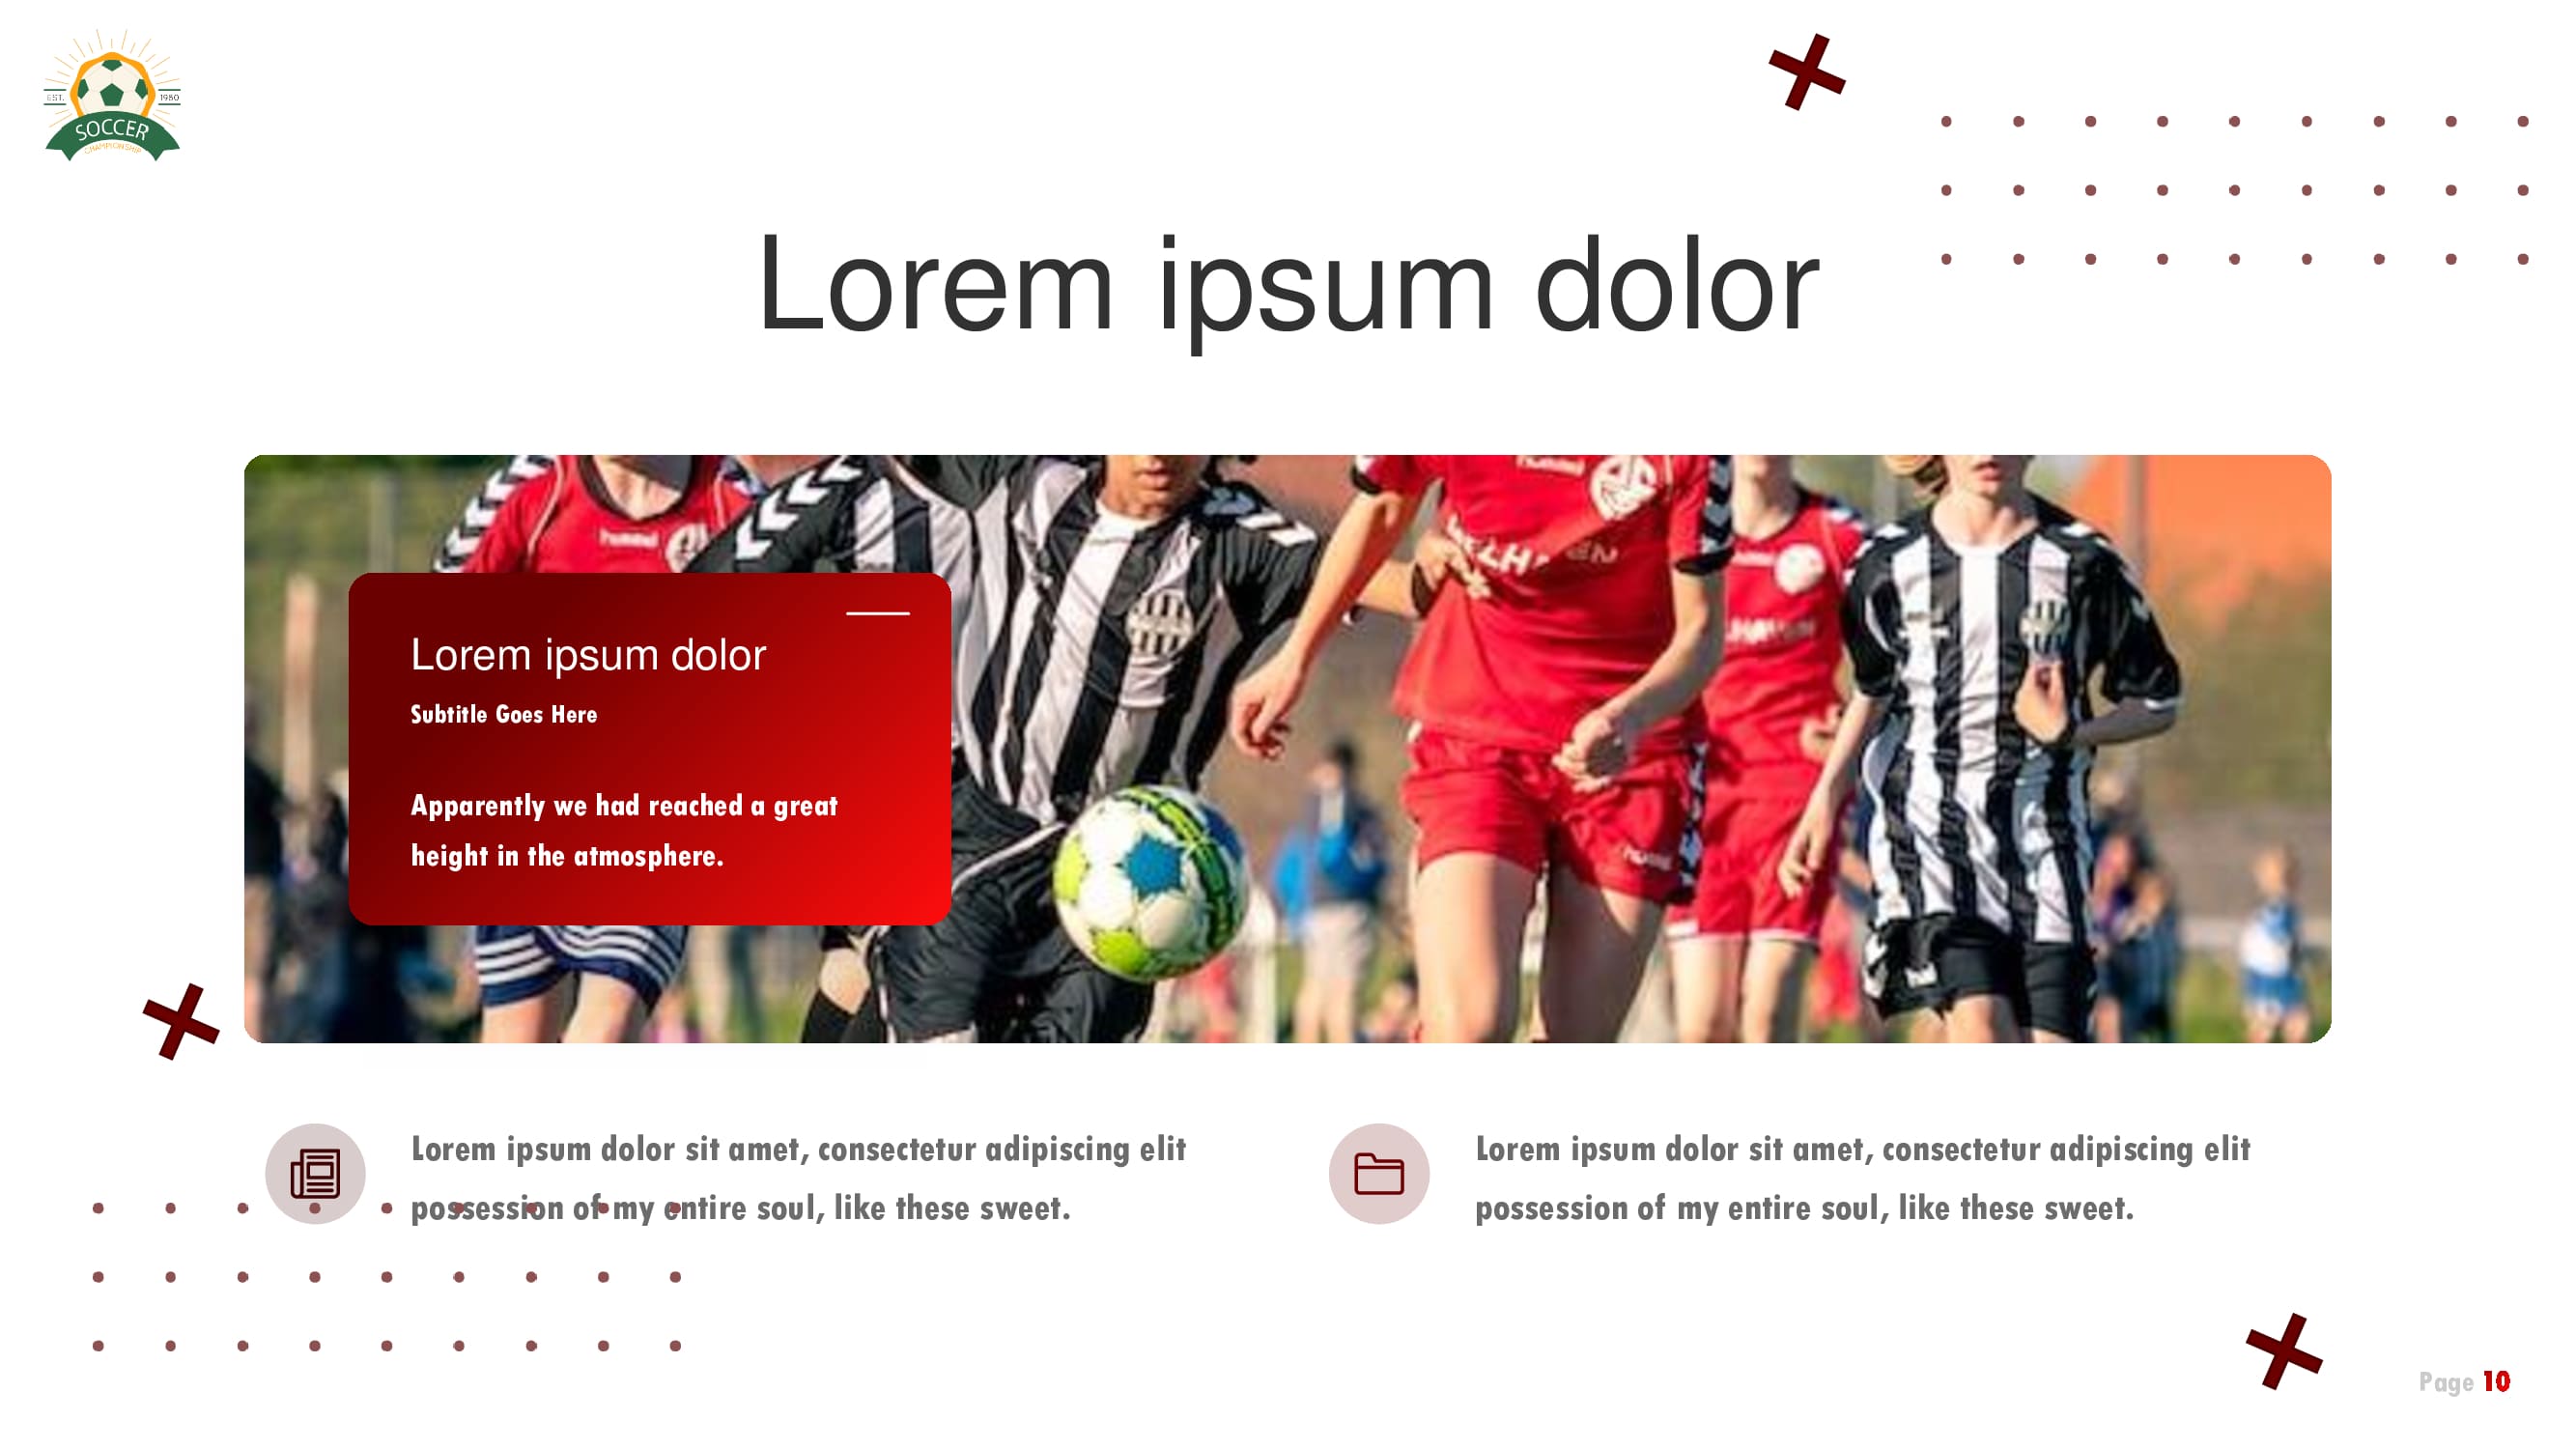 Cool image of the soccer league and 2 text sections on a white slide.